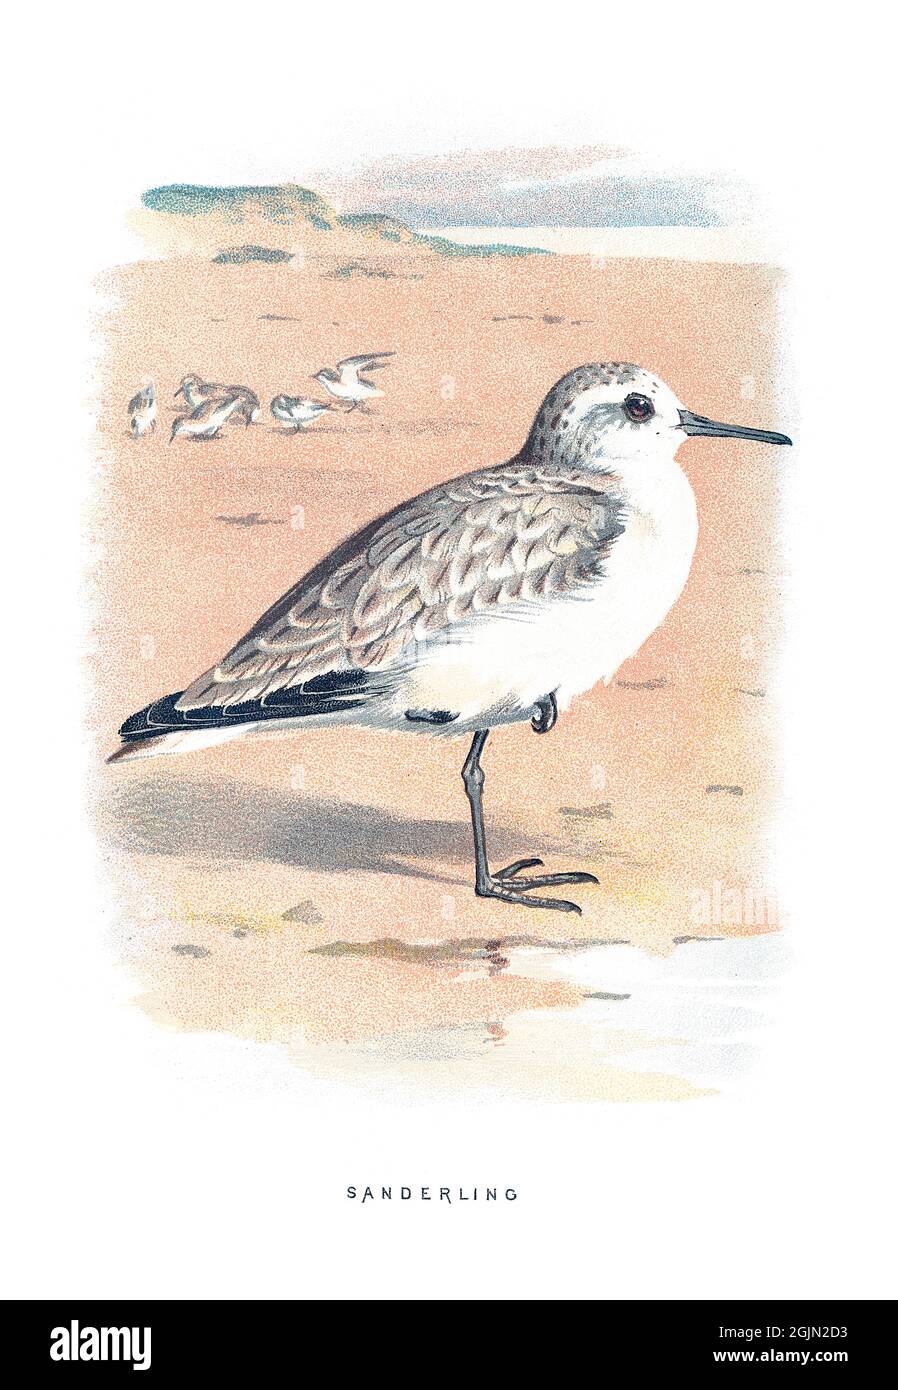 The sanderling, Calidris alba, is a small wading bird. Stock Photo